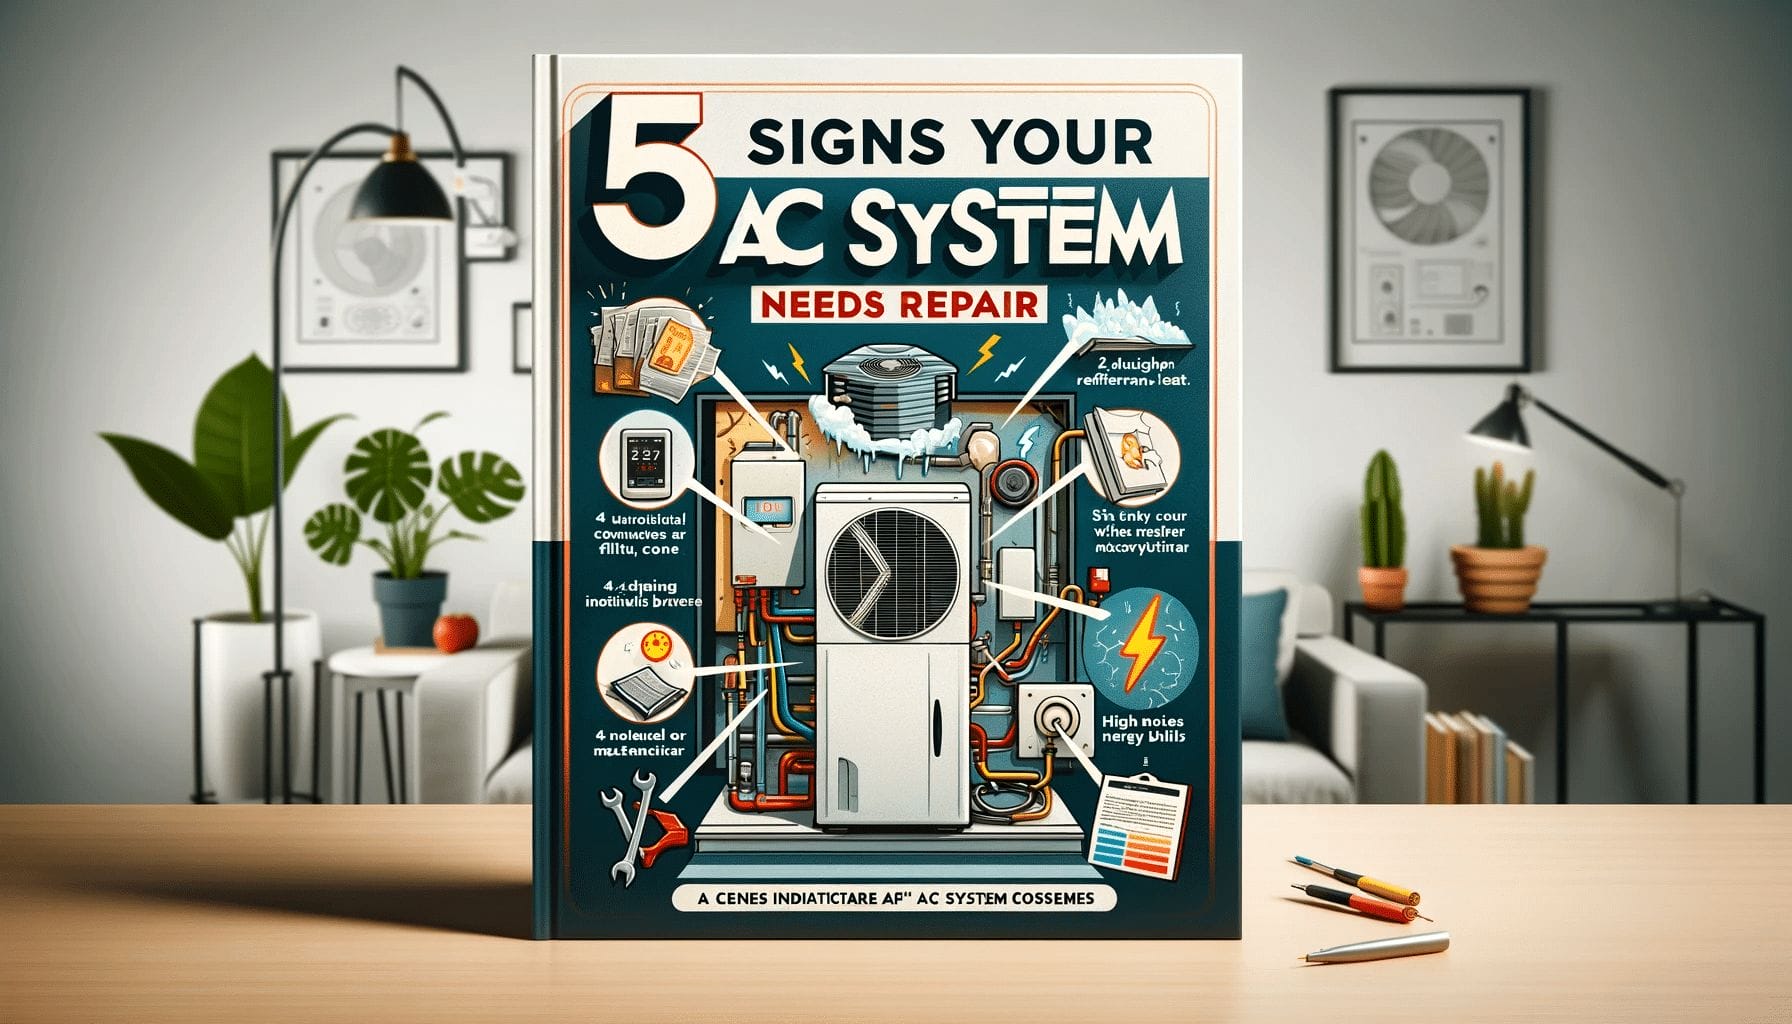 5 signs your ac system needs repair.